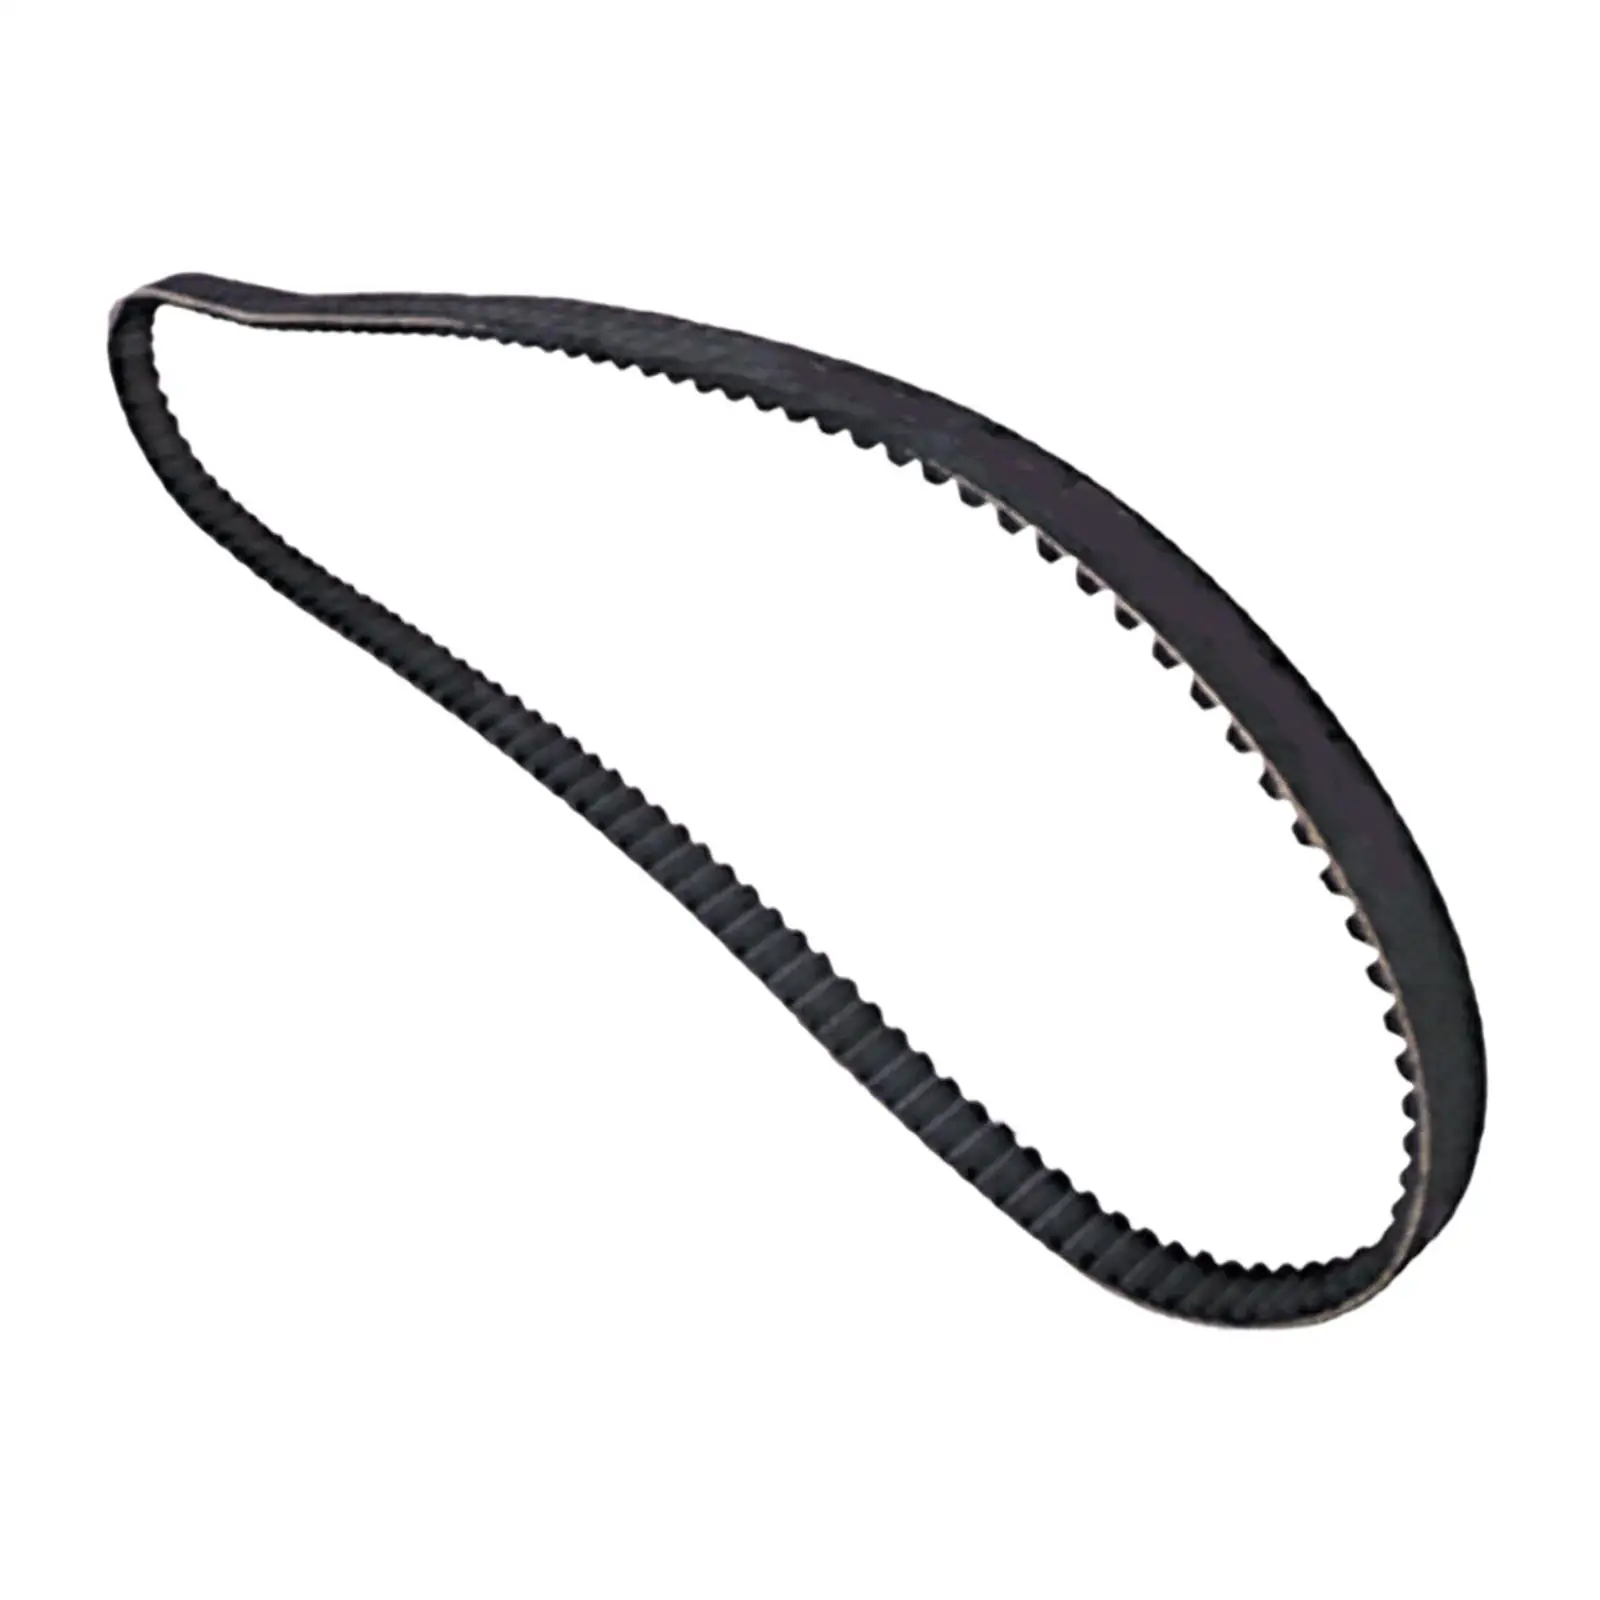 Rear Drive Belt 40015-90 133 Tooth 1 1/2